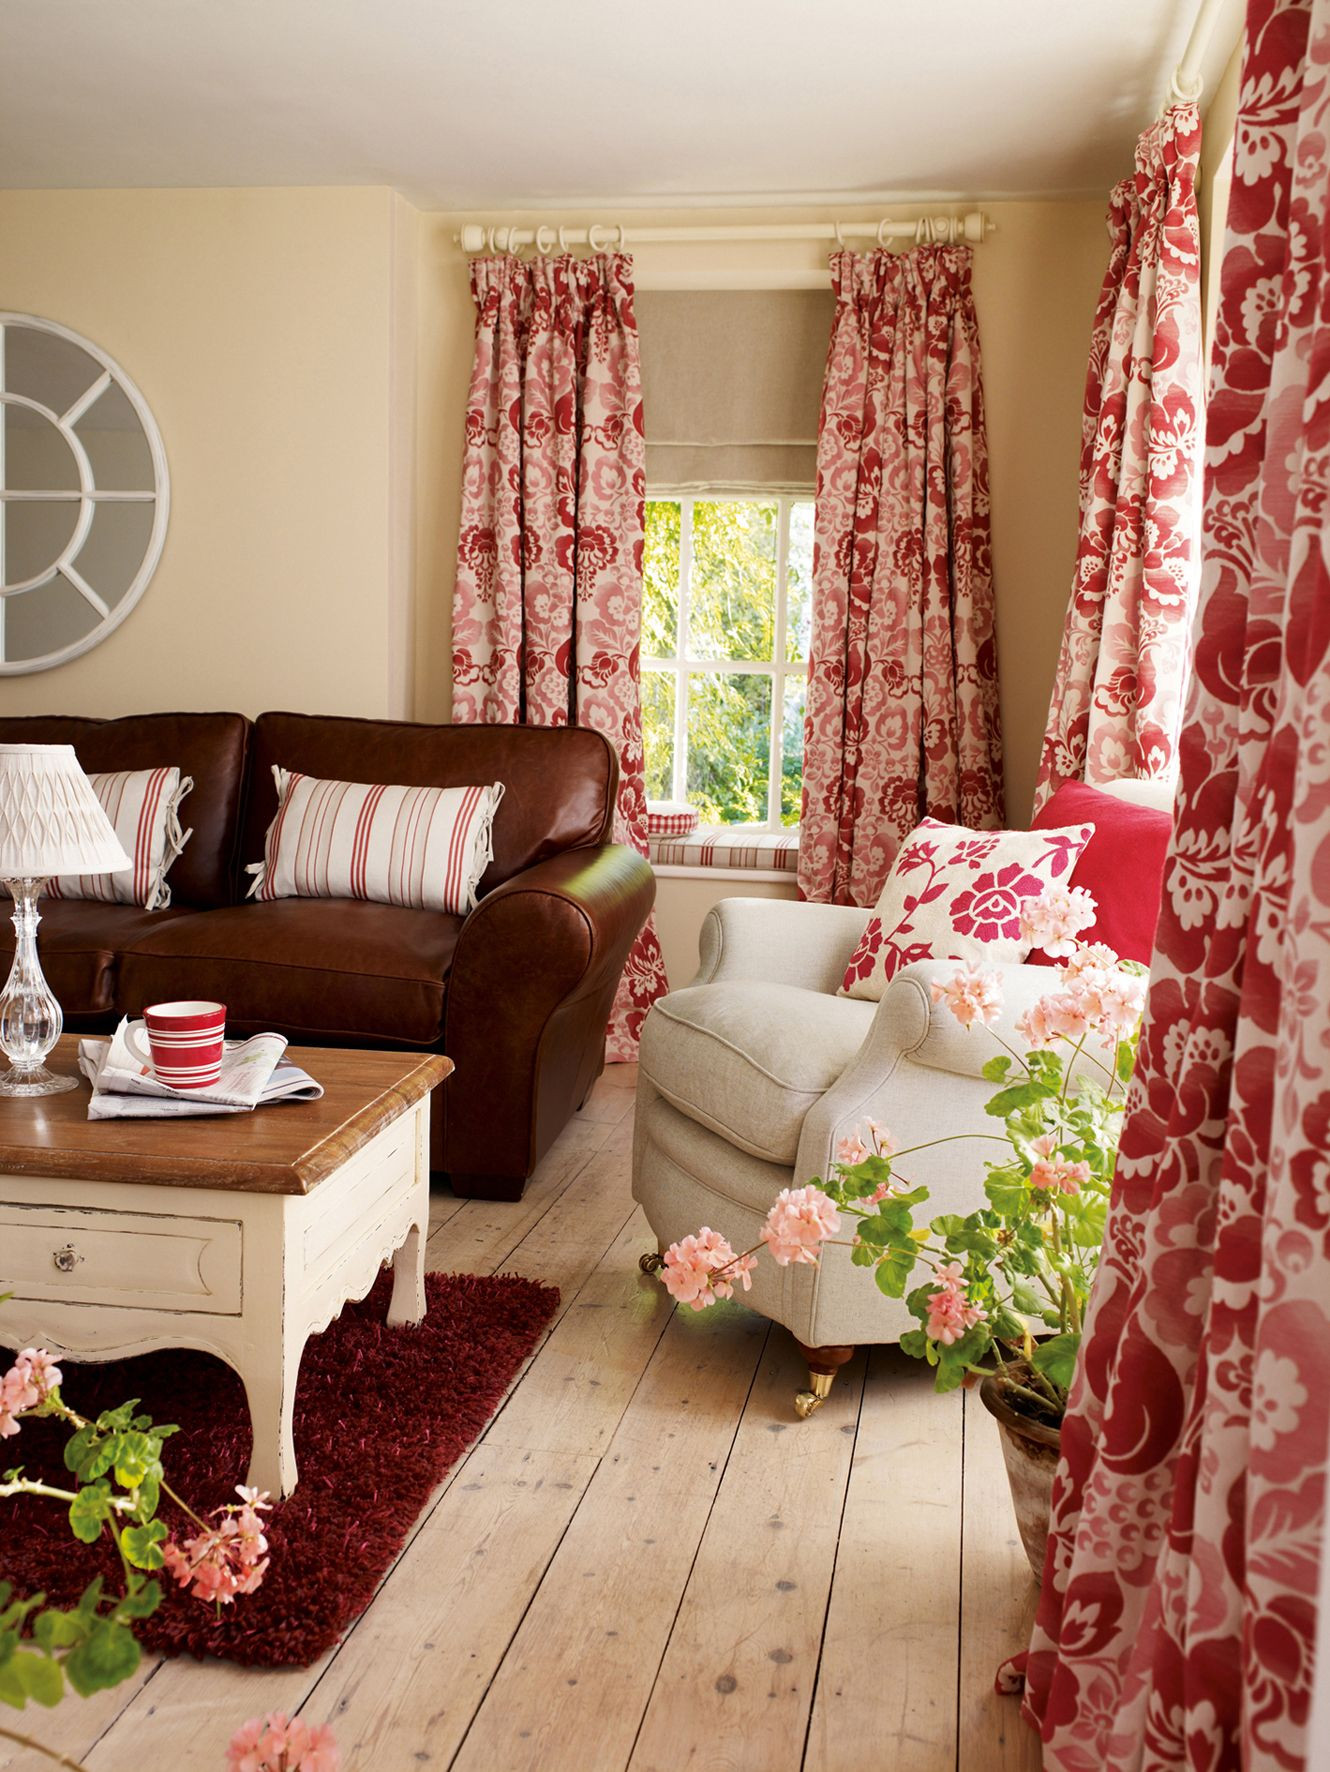 Country Curtains For Living Room
 Love the fullness of these curtains would hang them